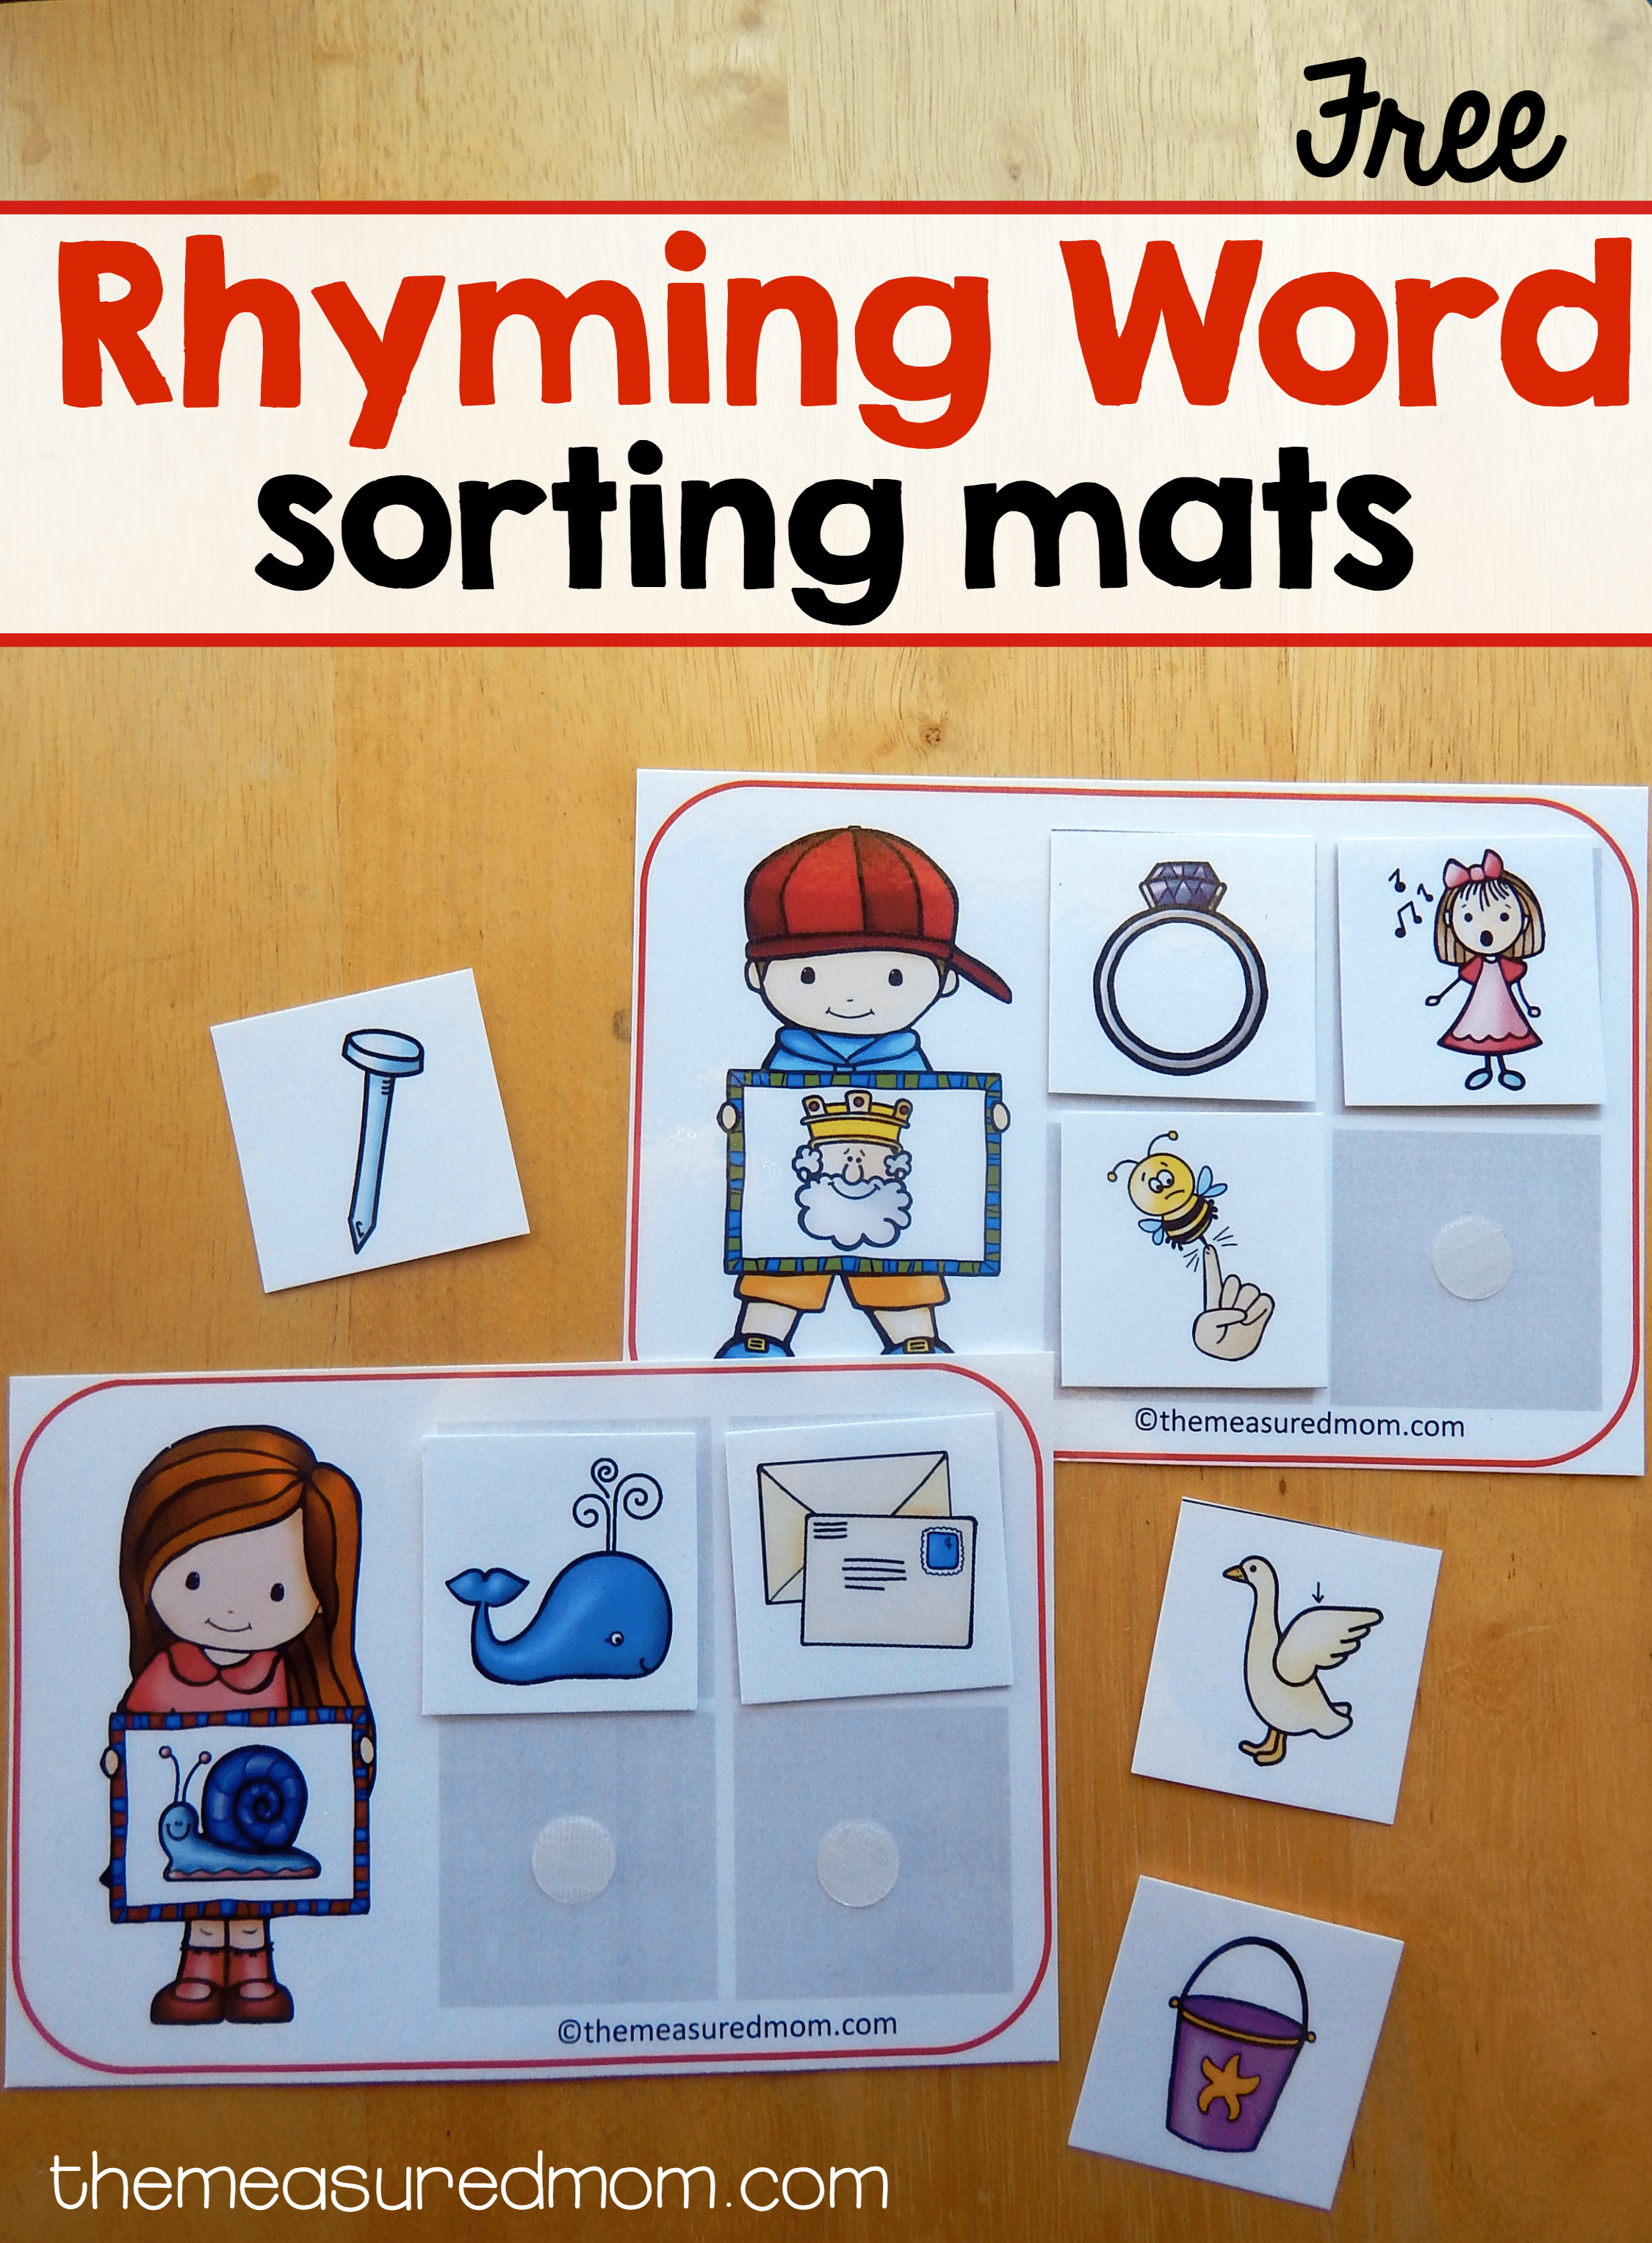 14 Free sorting mats for rhyming words - The Measured Mom